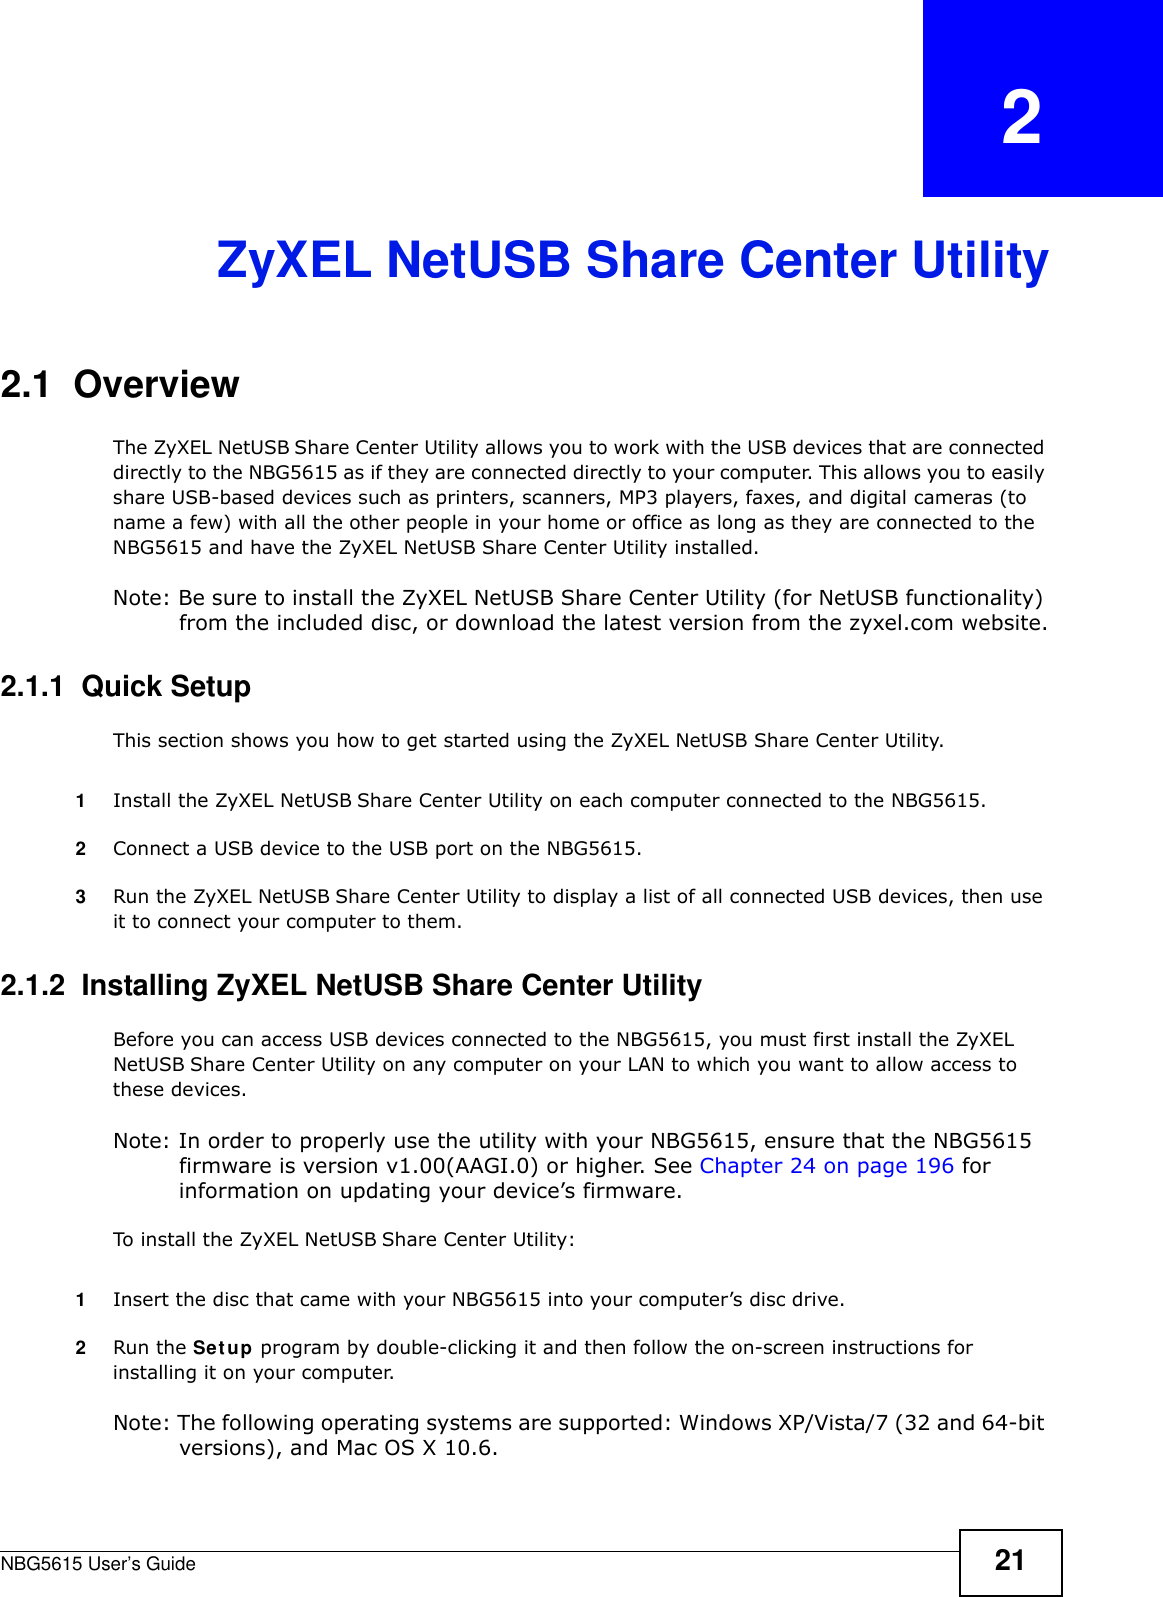 NBG5615 User’s Guide 21CHAPTER   2ZyXEL NetUSB Share Center Utility2.1  OverviewThe ZyXEL NetUSB Share Center Utility allows you to work with the USB devices that are connected directly to the NBG5615 as if they are connected directly to your computer. This allows you to easily share USB-based devices such as printers, scanners, MP3 players, faxes, and digital cameras (to name a few) with all the other people in your home or office as long as they are connected to the NBG5615 and have the ZyXEL NetUSB Share Center Utility installed.Note: Be sure to install the ZyXEL NetUSB Share Center Utility (for NetUSB functionality) from the included disc, or download the latest version from the zyxel.com website.2.1.1  Quick SetupThis section shows you how to get started using the ZyXEL NetUSB Share Center Utility.1Install the ZyXEL NetUSB Share Center Utility on each computer connected to the NBG5615.2Connect a USB device to the USB port on the NBG5615. 3Run the ZyXEL NetUSB Share Center Utility to display a list of all connected USB devices, then use it to connect your computer to them.2.1.2  Installing ZyXEL NetUSB Share Center UtilityBefore you can access USB devices connected to the NBG5615, you must first install the ZyXEL NetUSB Share Center Utility on any computer on your LAN to which you want to allow access to these devices.Note: In order to properly use the utility with your NBG5615, ensure that the NBG5615 firmware is version v1.00(AAGI.0) or higher. See Chapter 24 on page 196 for information on updating your device’s firmware.To install the ZyXEL NetUSB Share Center Utility:1Insert the disc that came with your NBG5615 into your computer’s disc drive.2Run the Setup program by double-clicking it and then follow the on-screen instructions for installing it on your computer.Note: The following operating systems are supported: Windows XP/Vista/7 (32 and 64-bit versions), and Mac OS X 10.6.